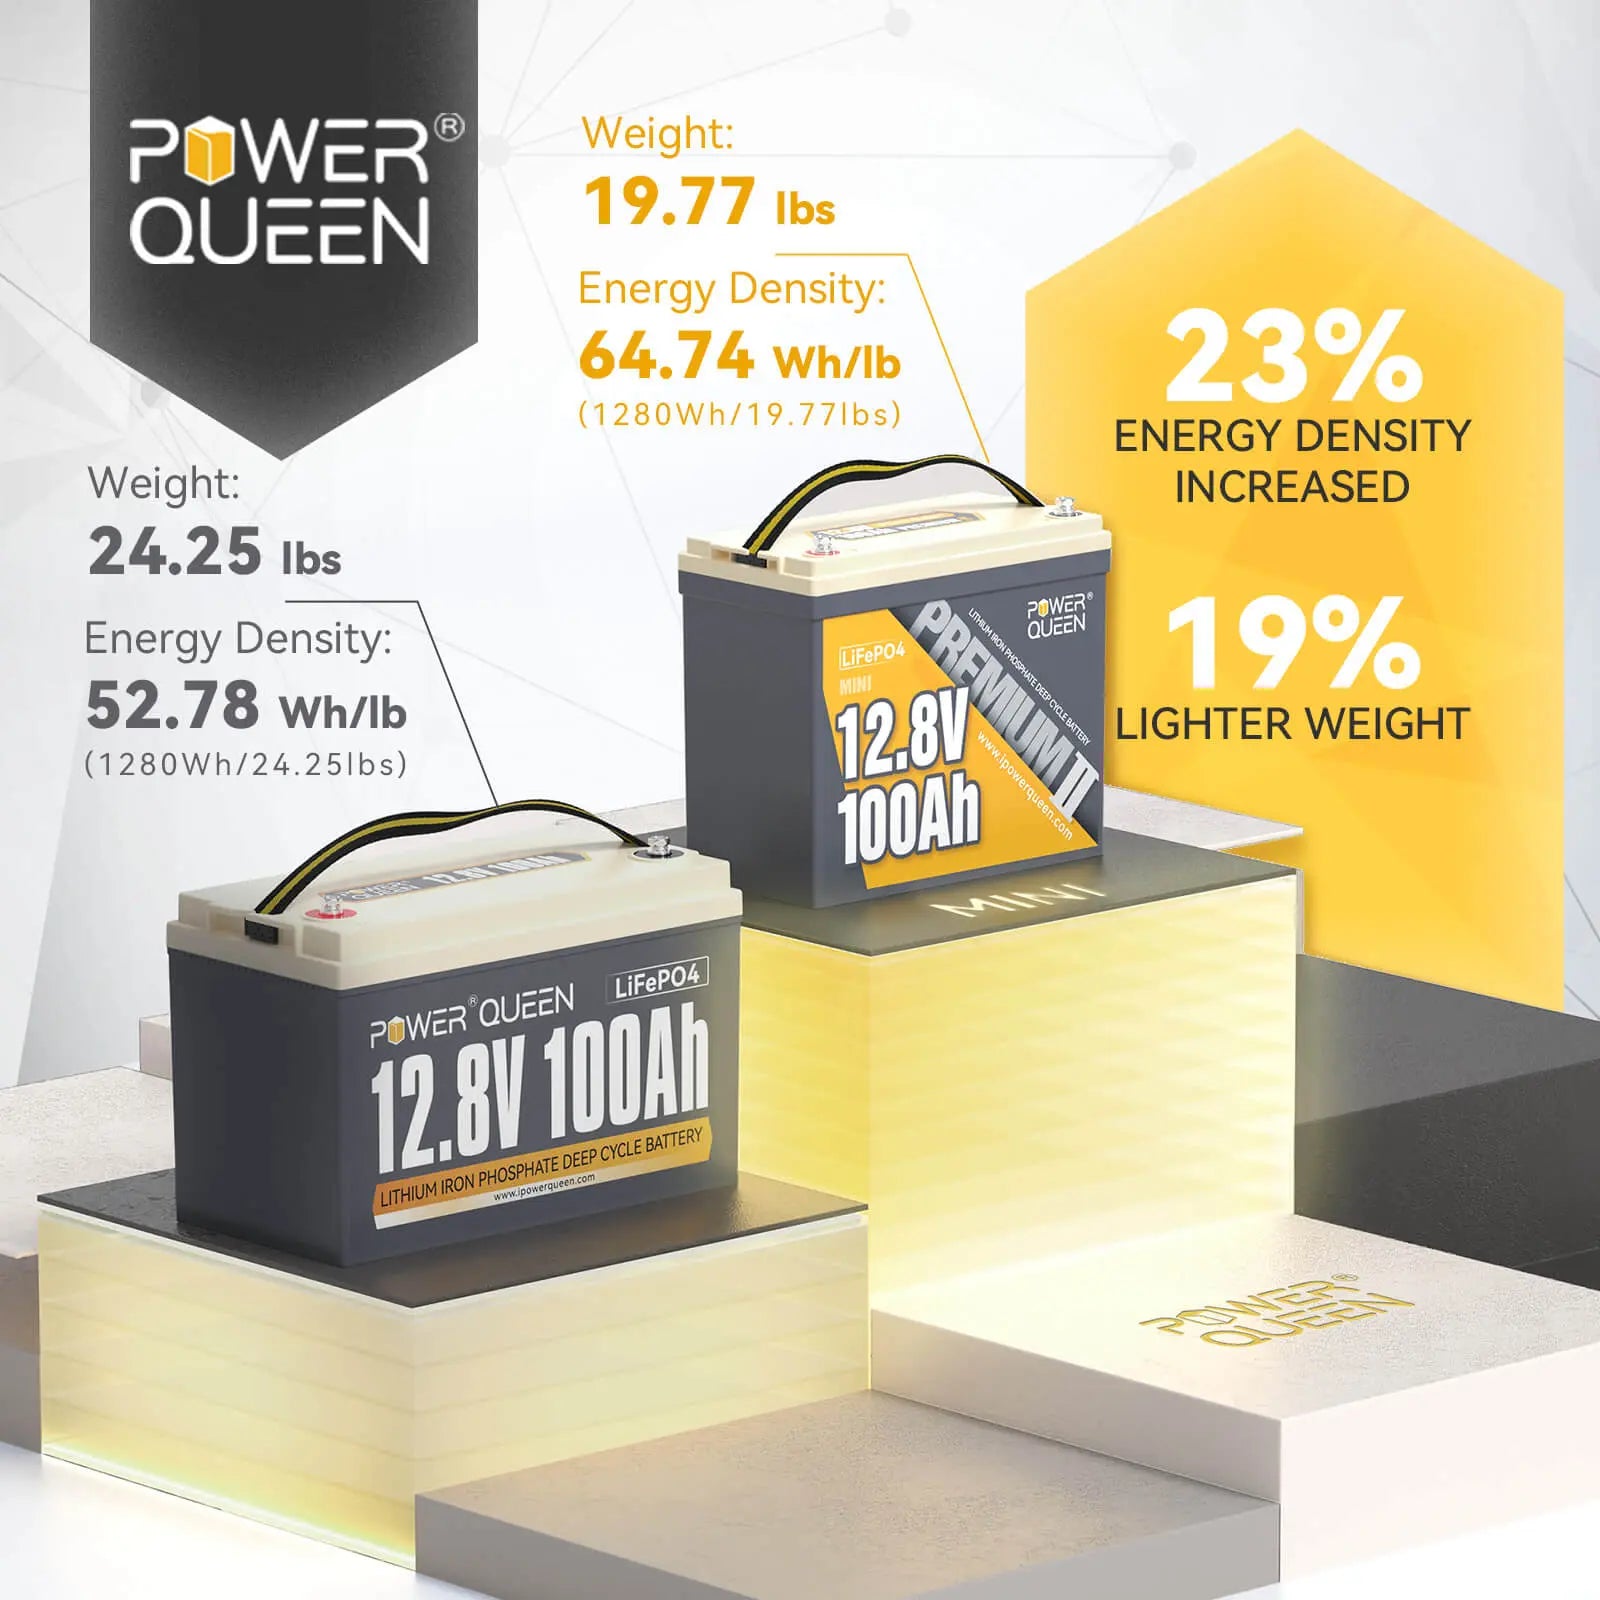 Power Queen 12.8V 100Ah Mini LiFePO4 Battery+14.6V 20A charger